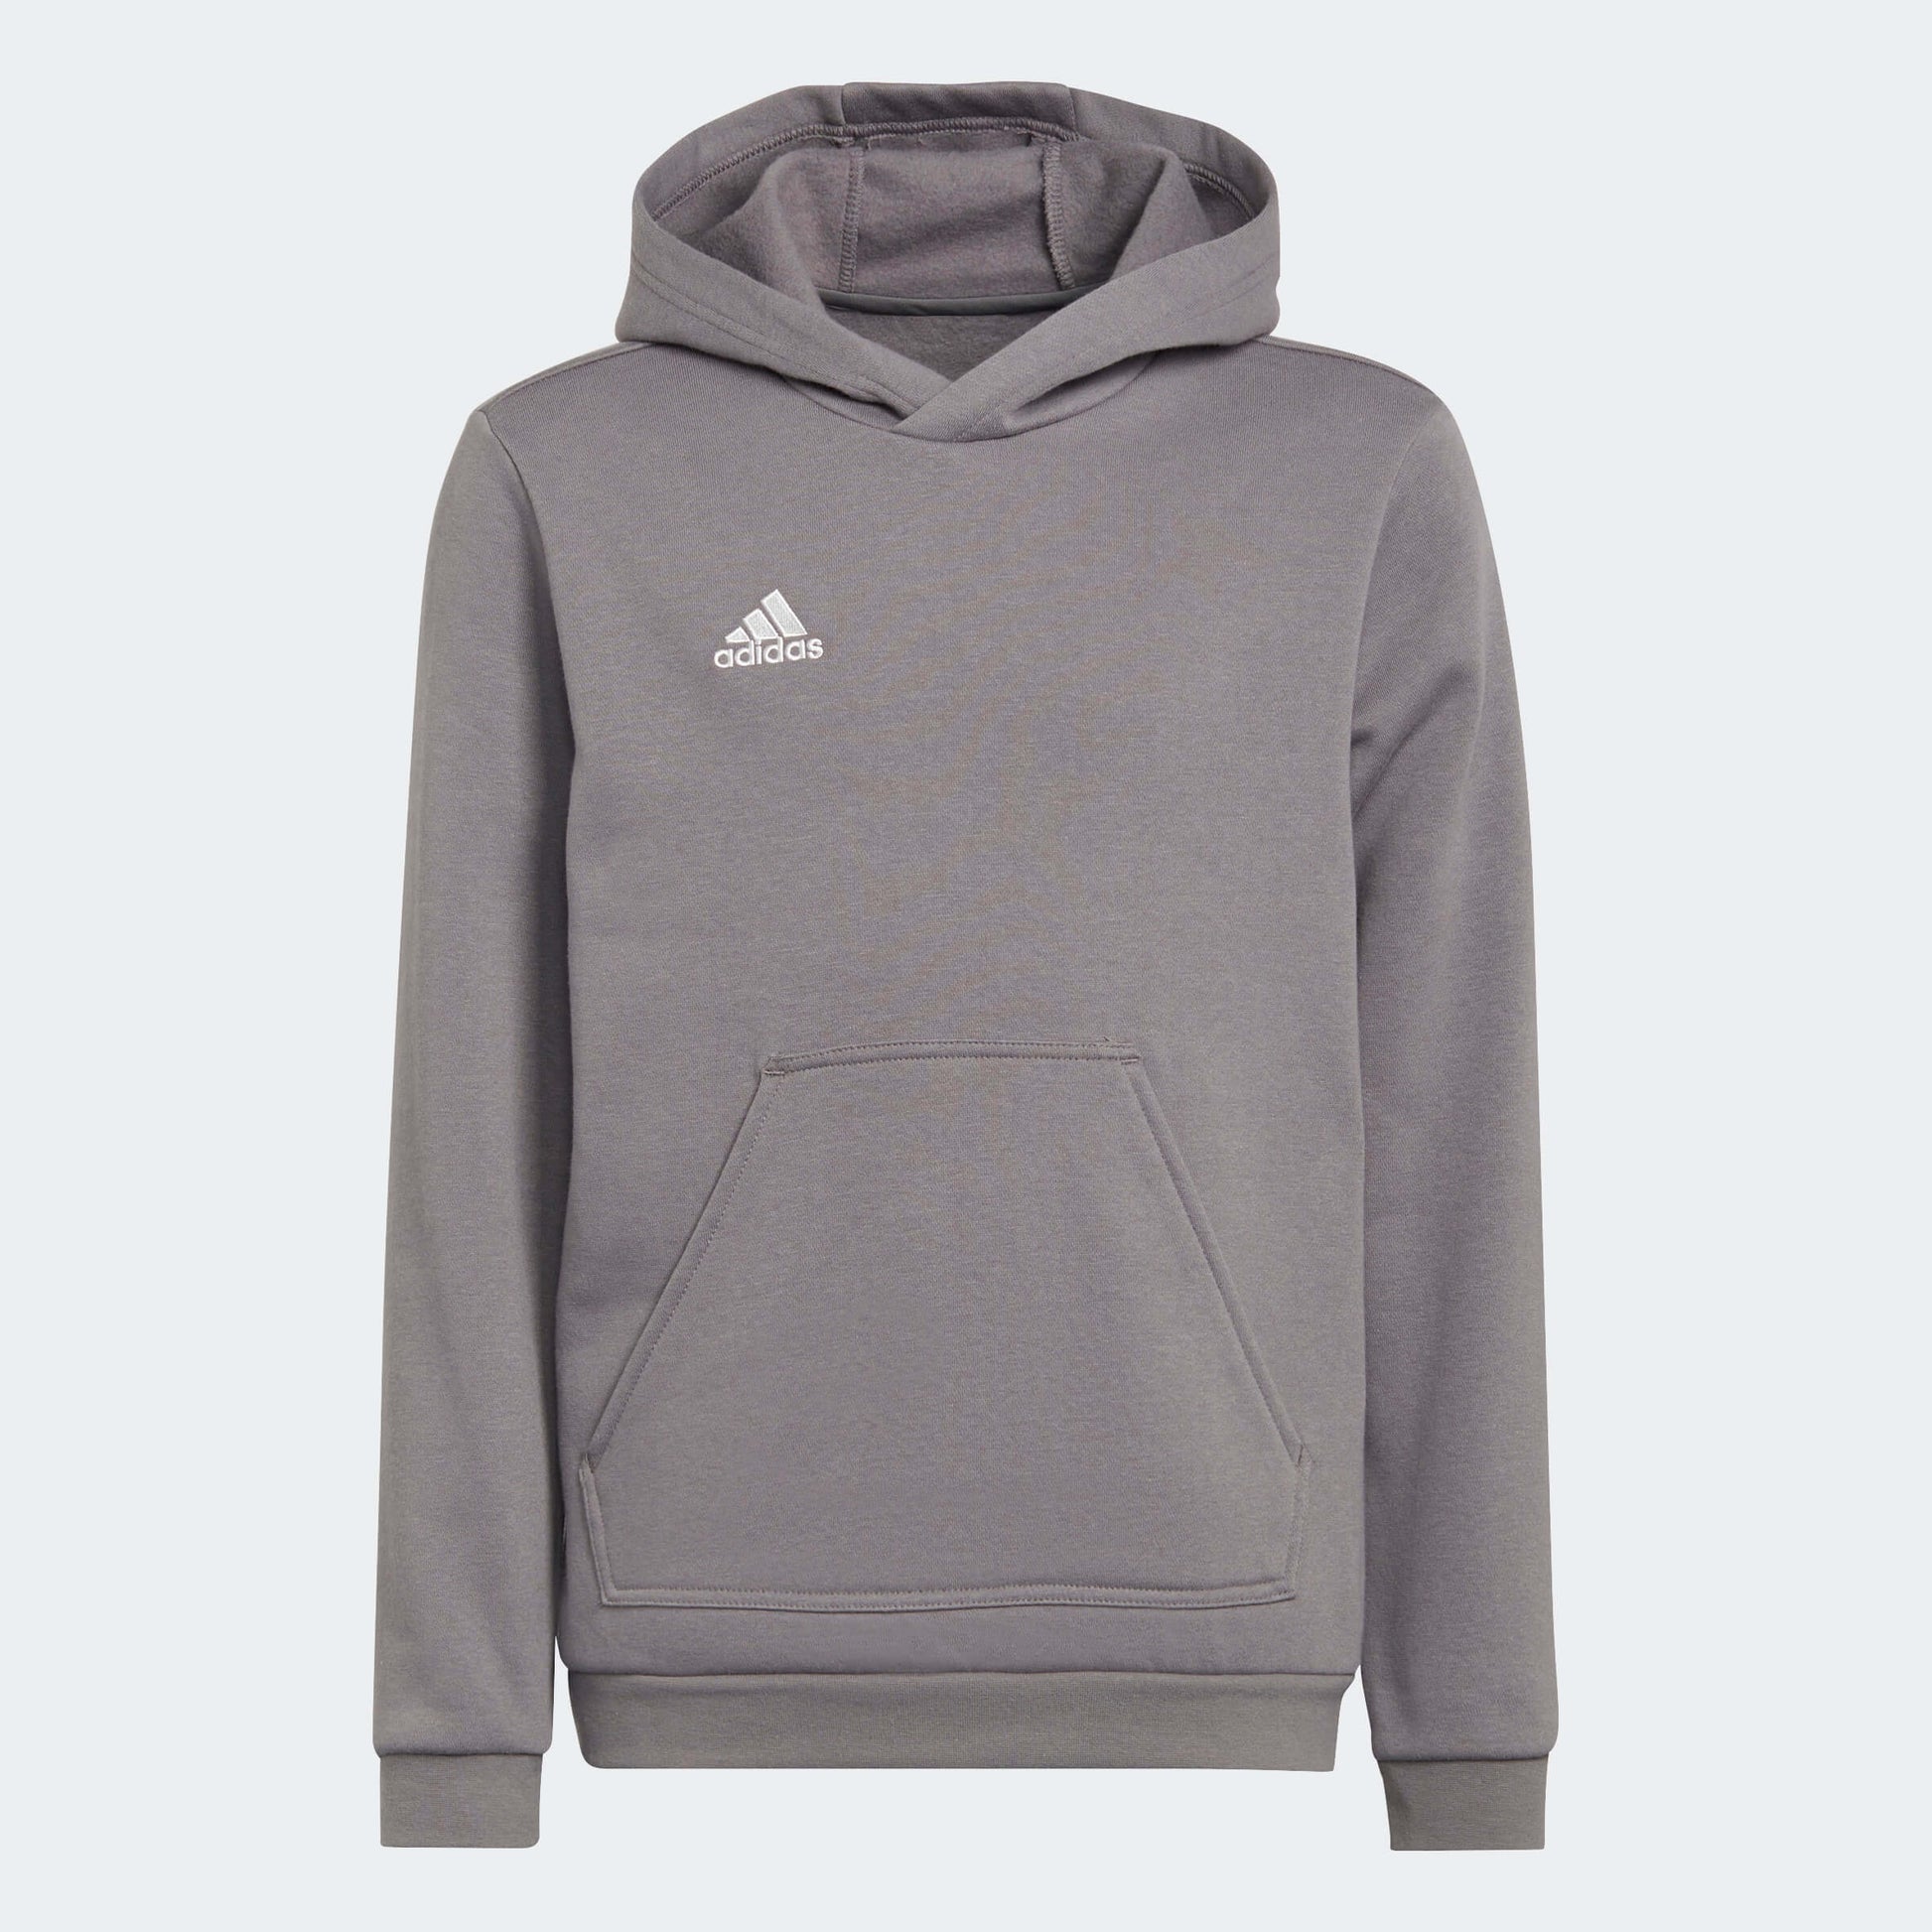 adidas YOUTH Entrada 22 Sweat Hoody Grey-White (Front)